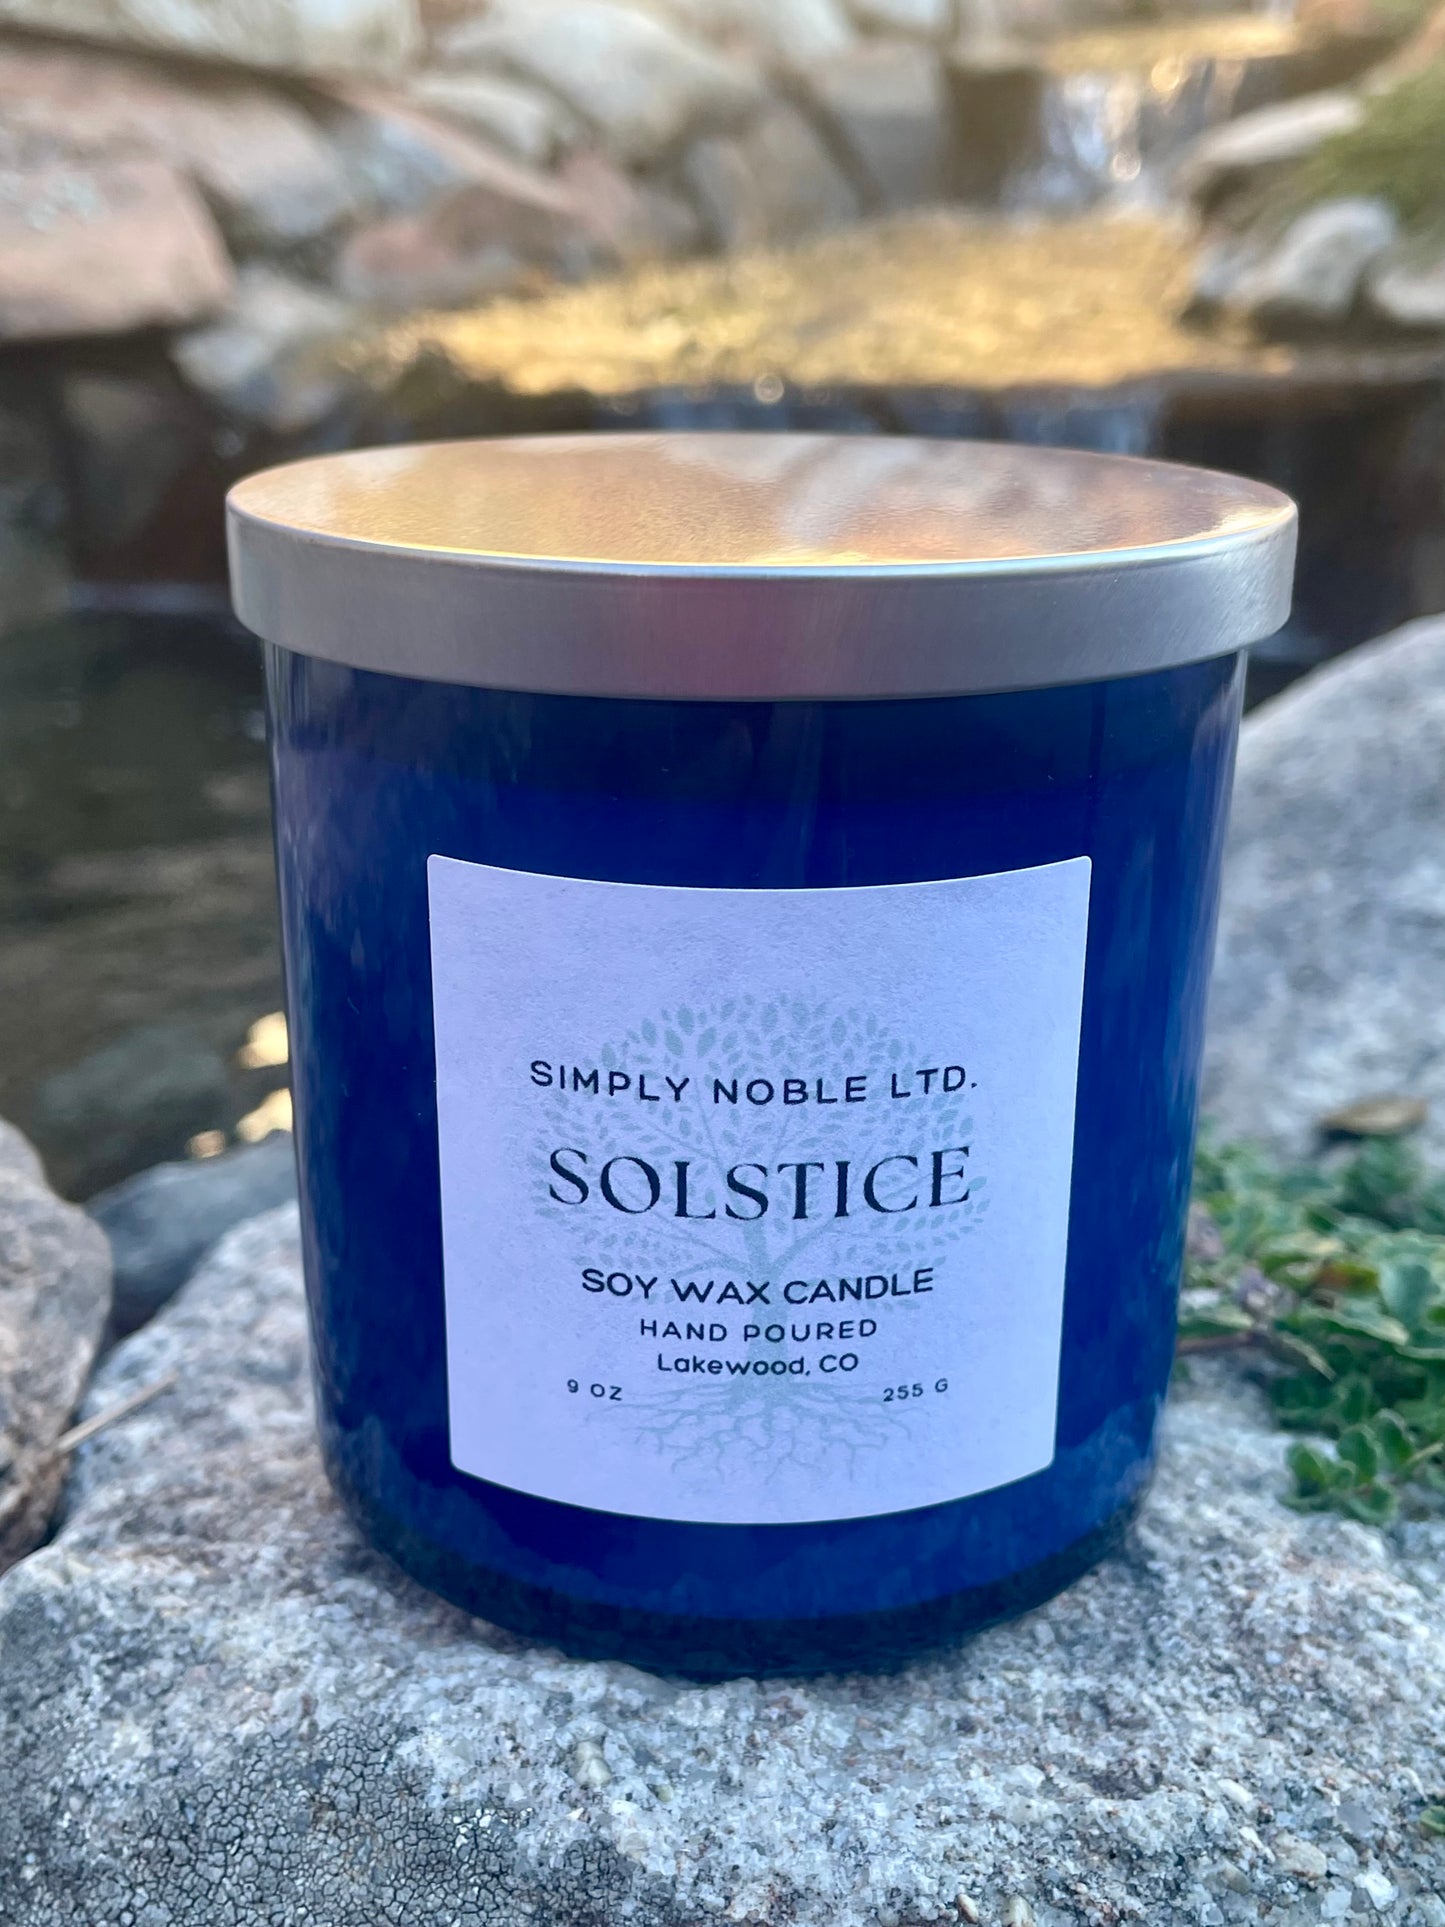 Solstice Soy Wax Candle